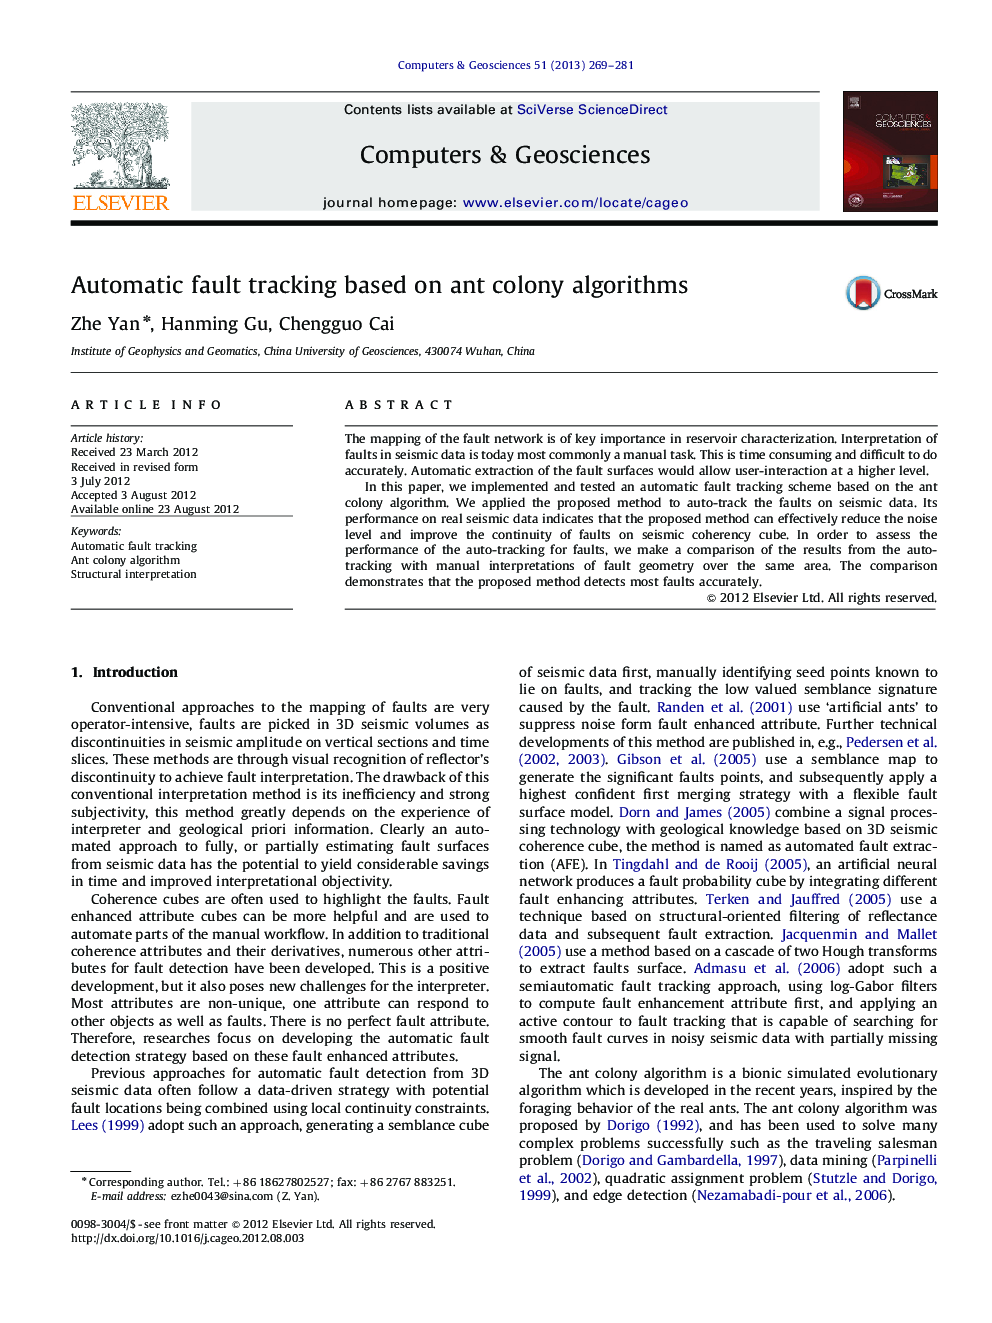 Automatic fault tracking based on ant colony algorithms